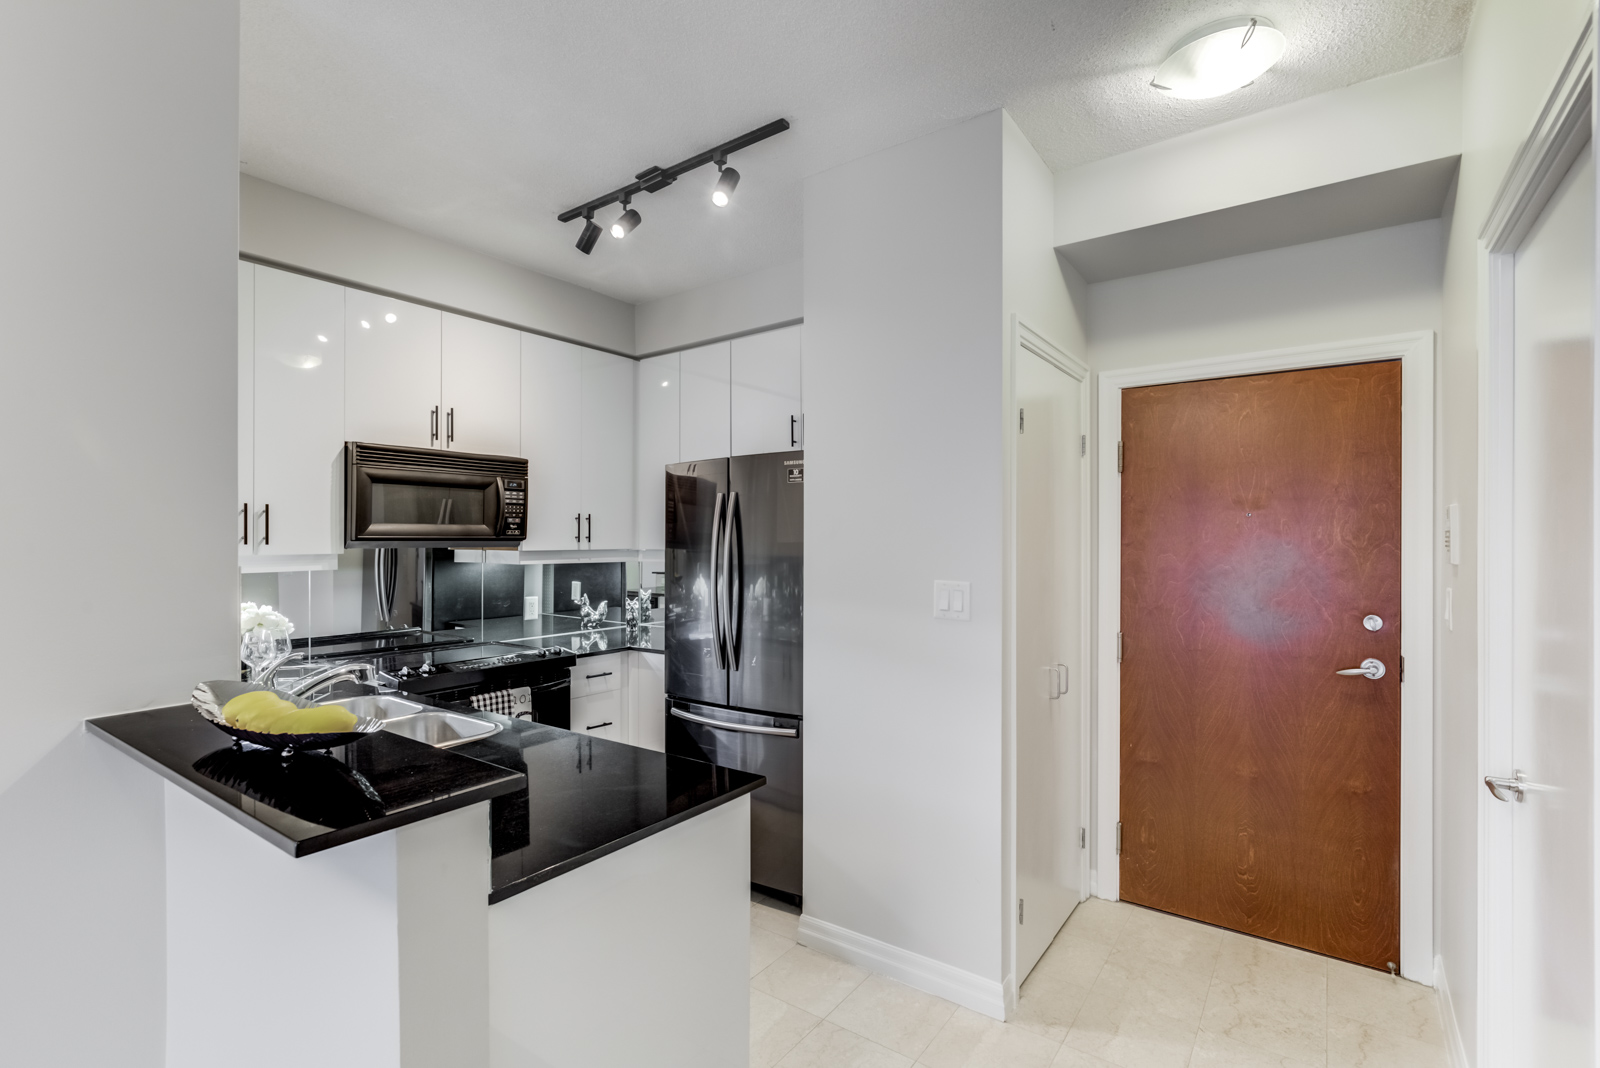 Renovated kitchen of 300 Bloor St E Unit 1809 with centre island, black counter tops and white sides.